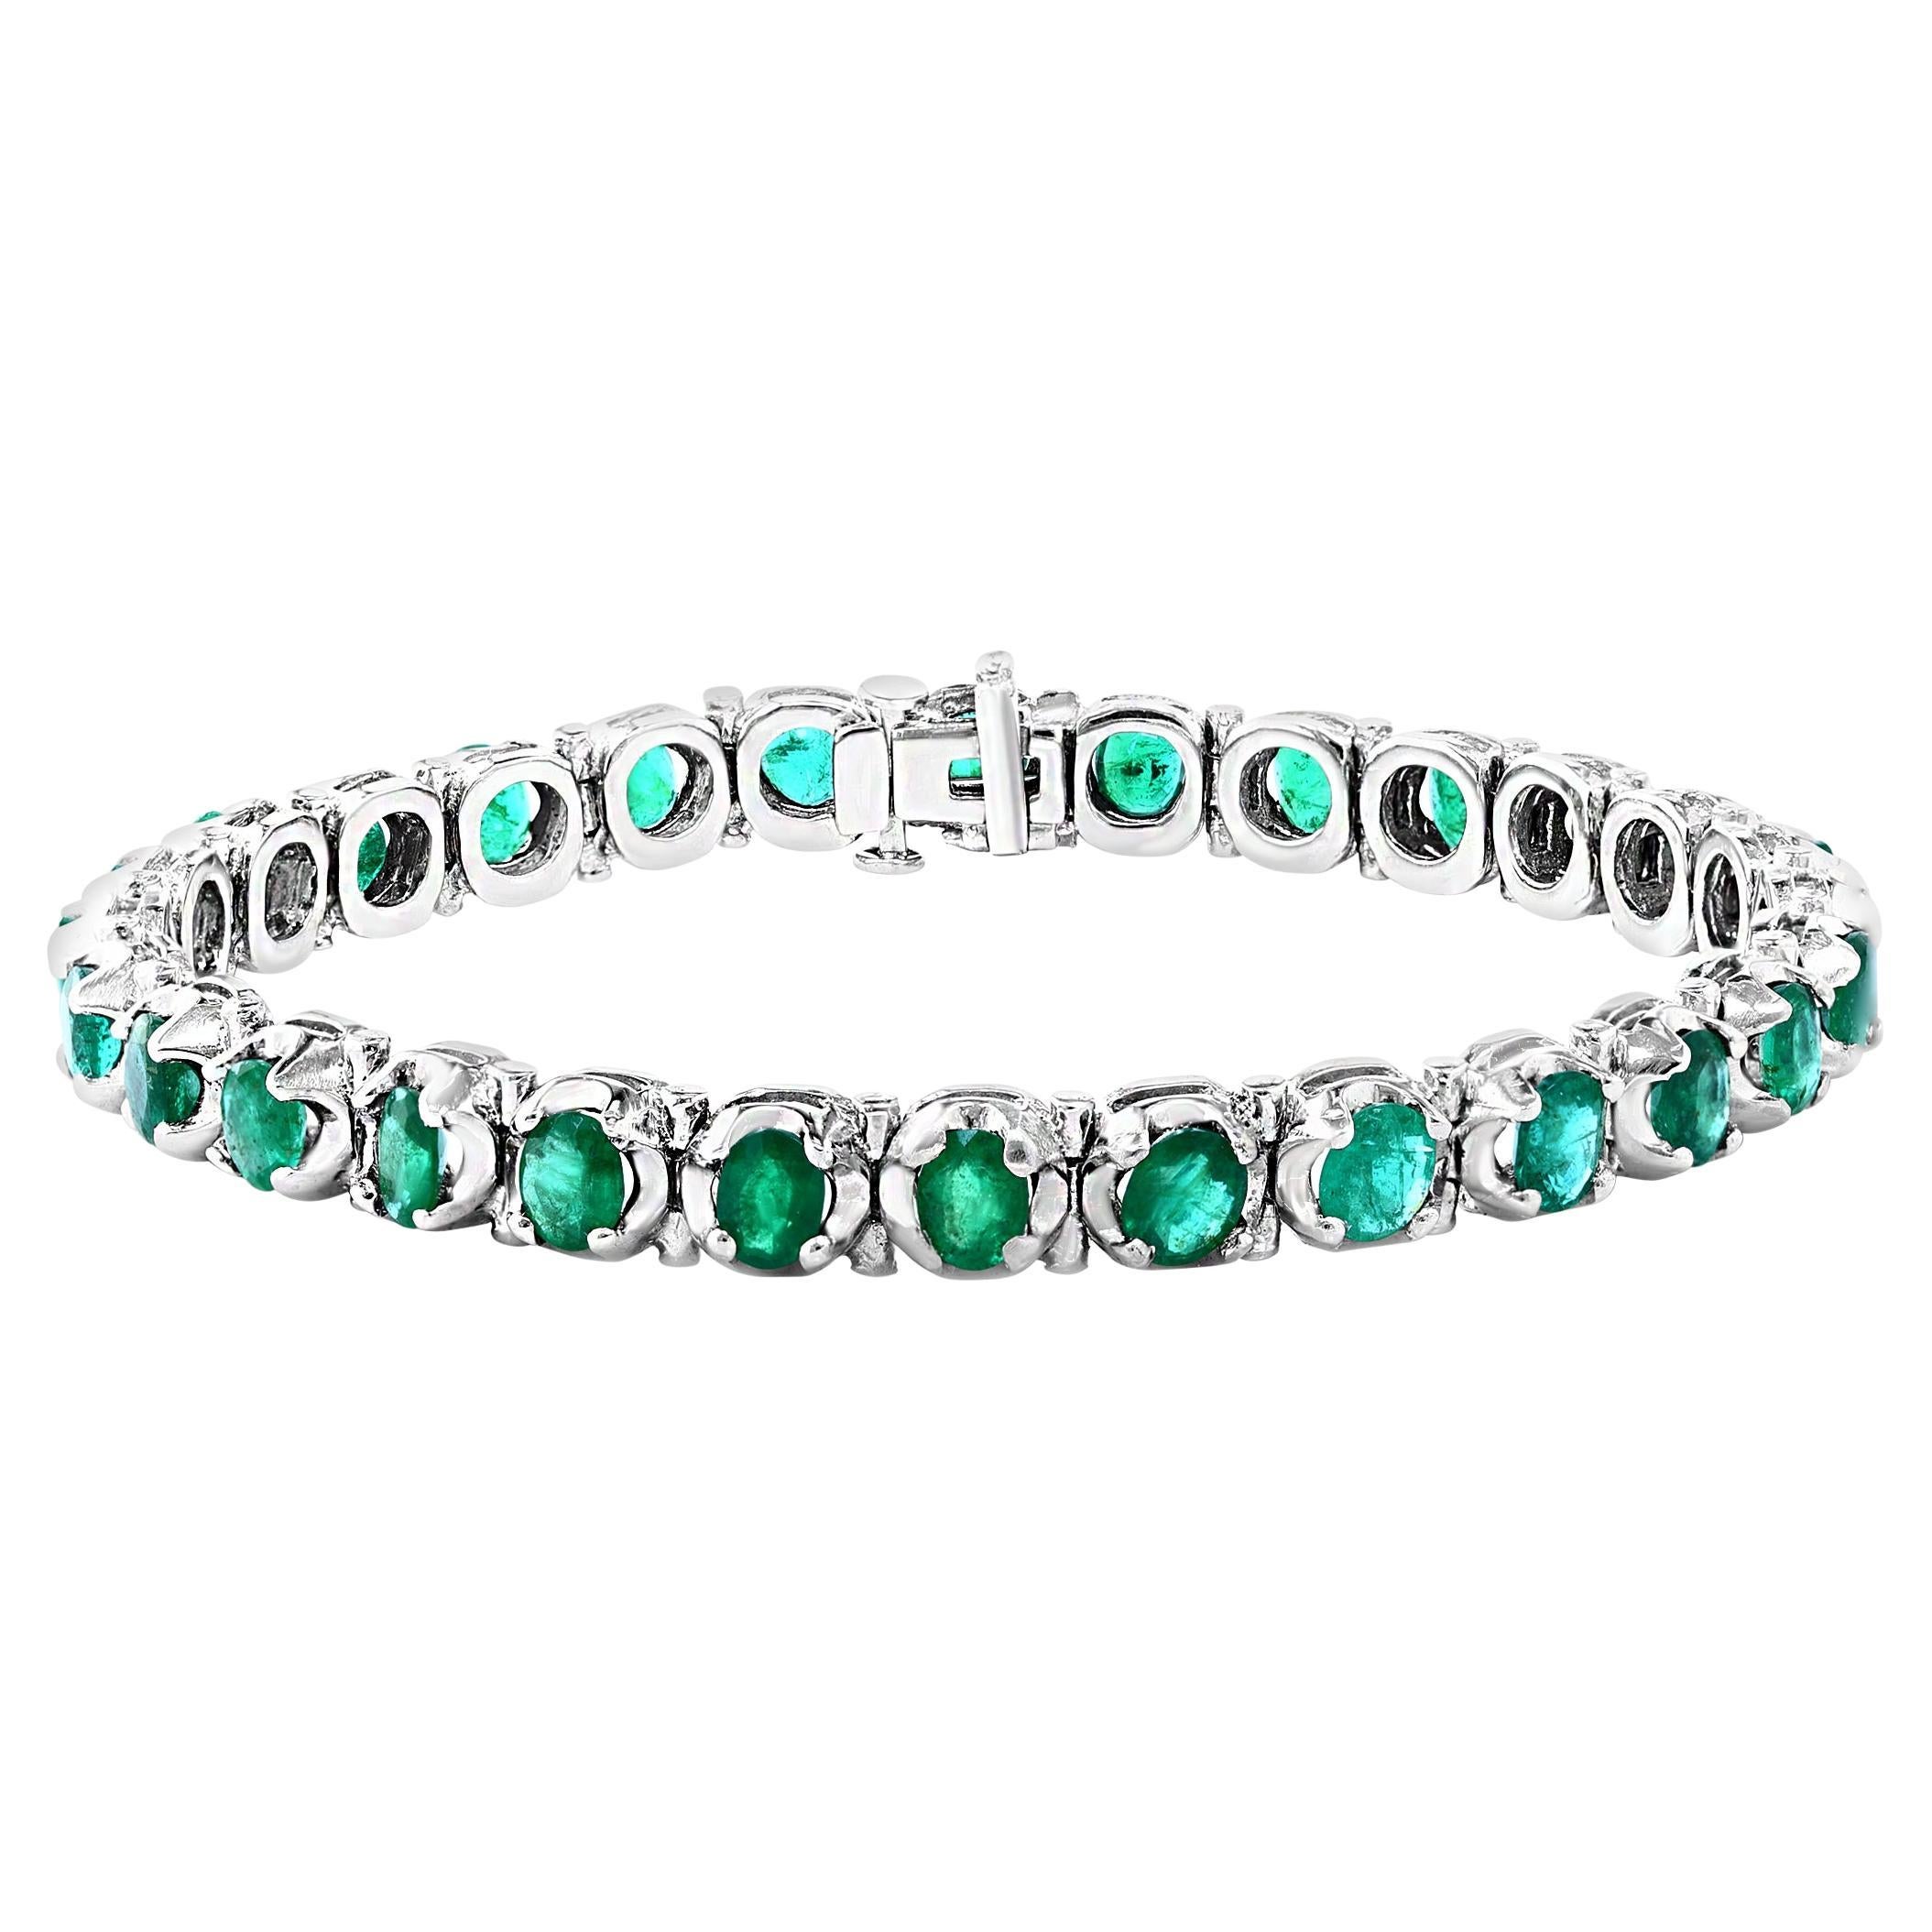  10 Ct Natural Oval Brazilian Emerald  Tennis Bracelet in Platinum , 7.5 Inches For Sale